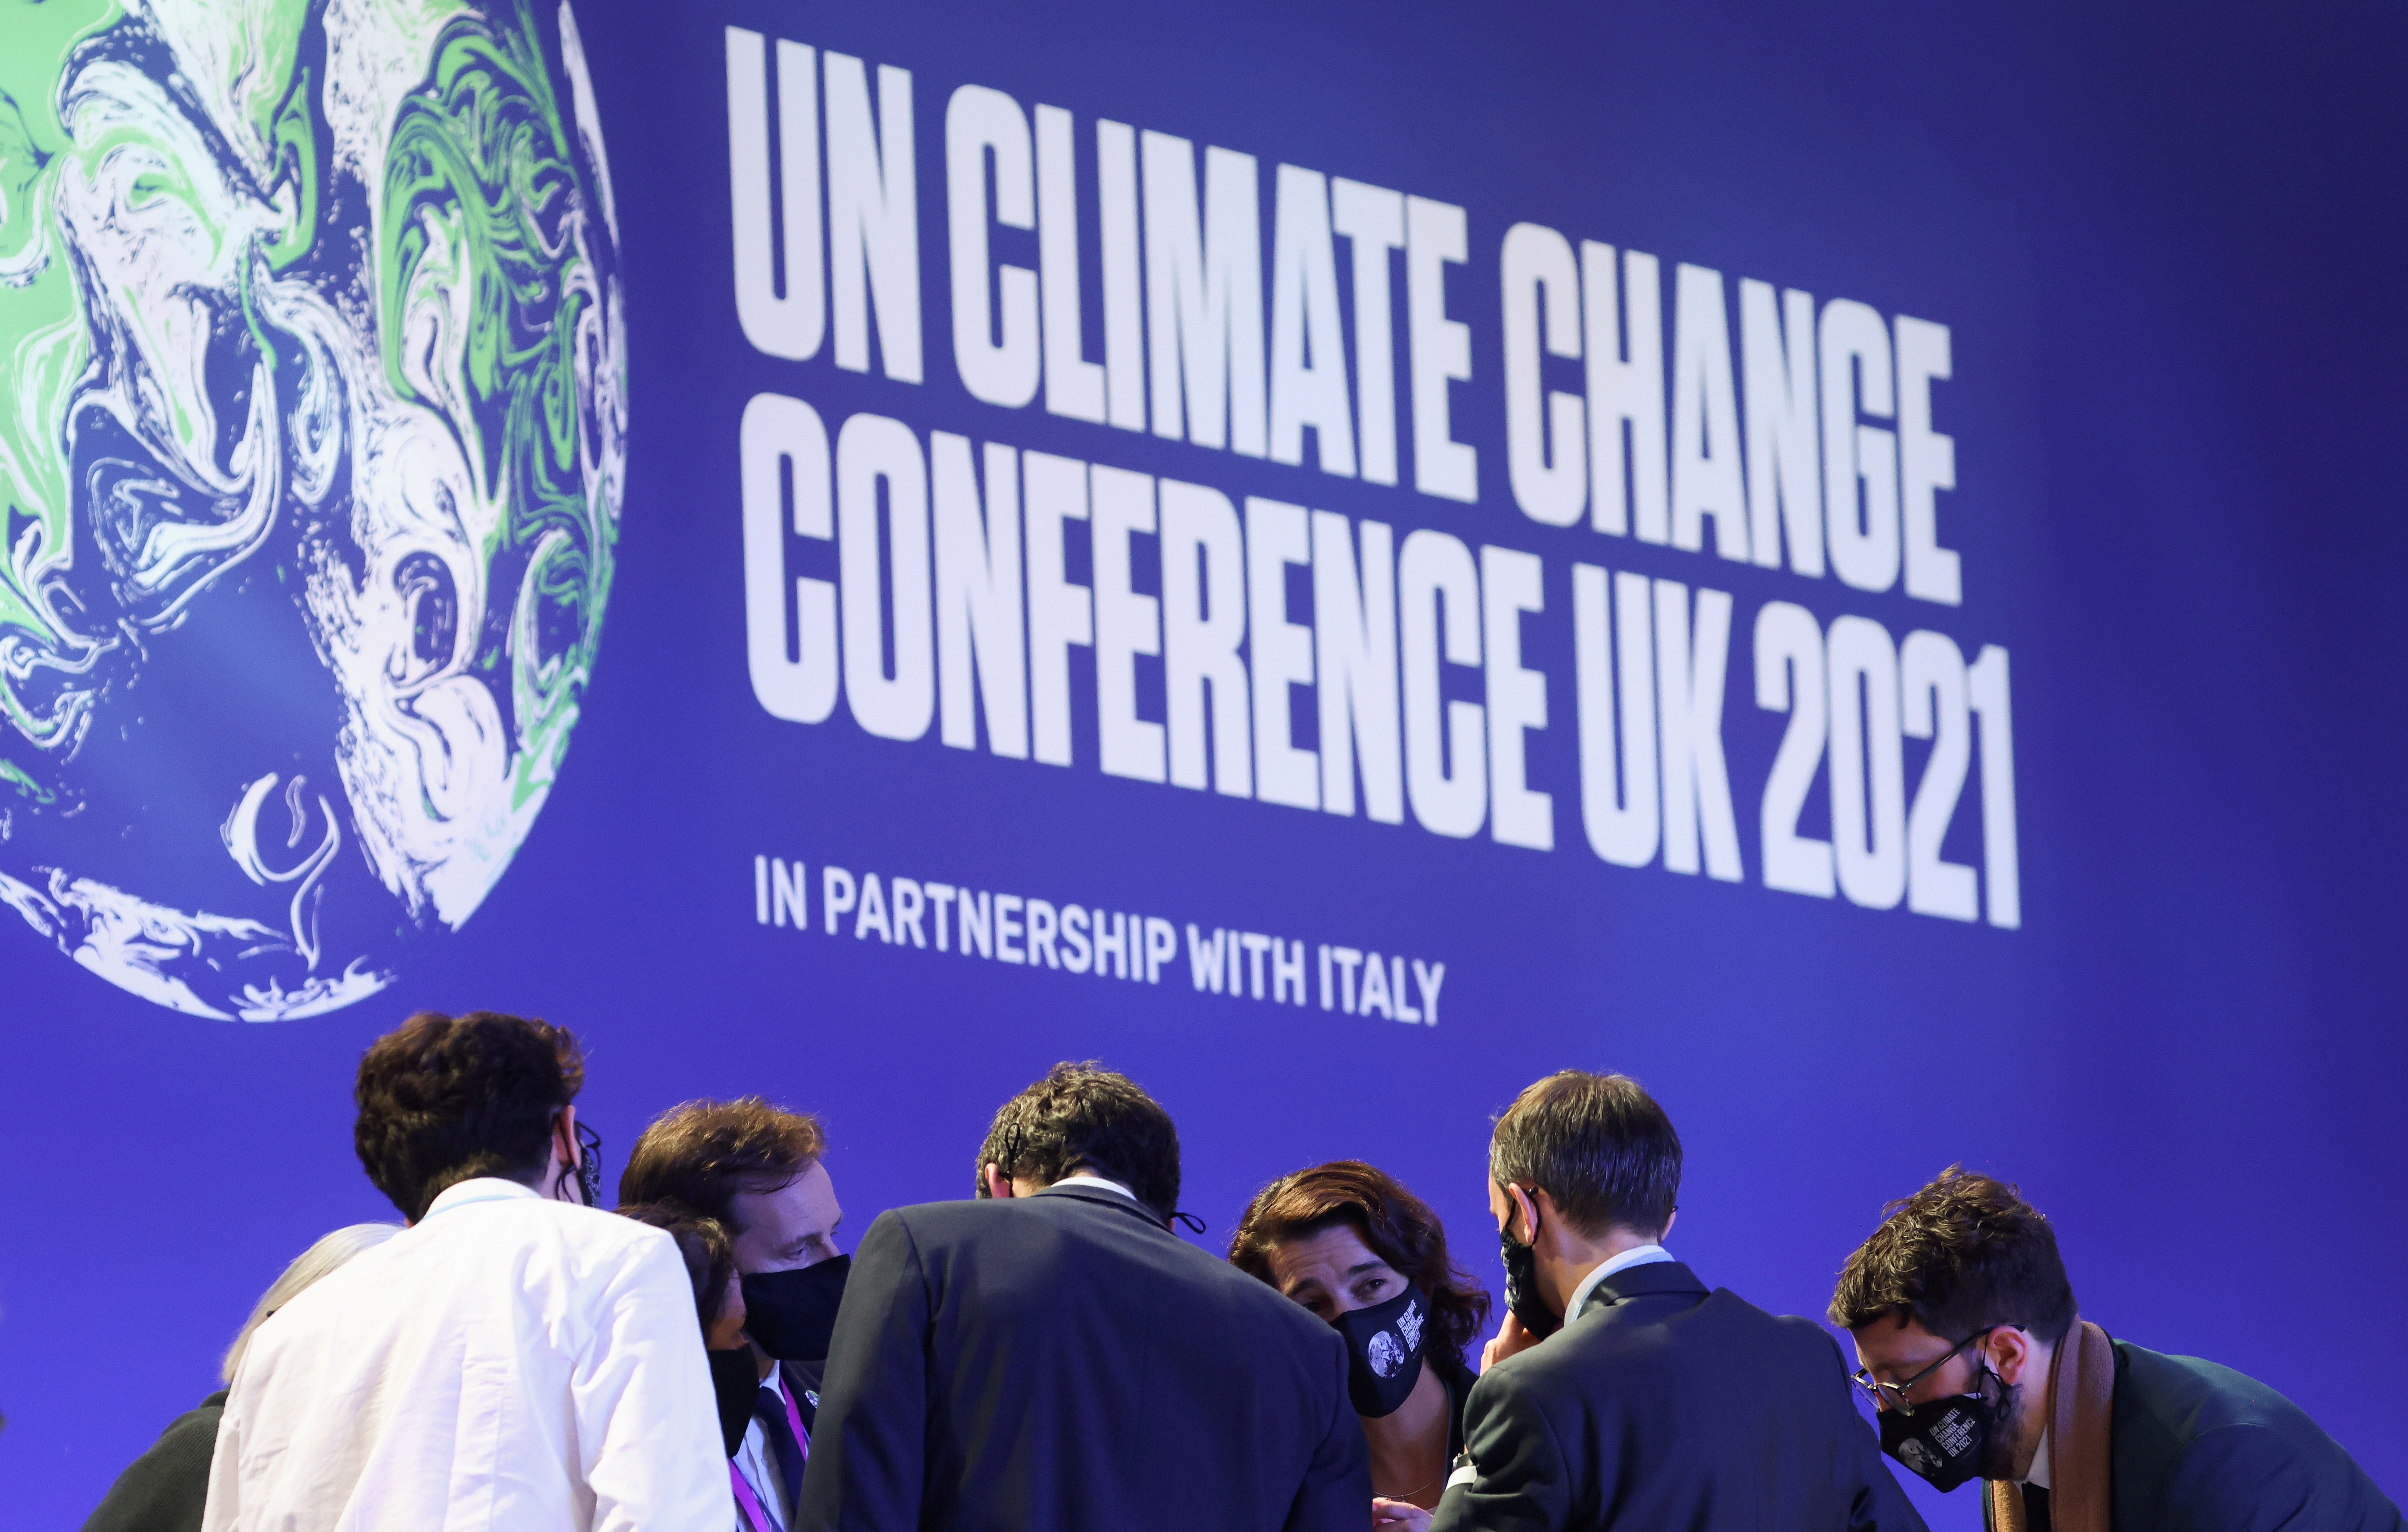 Delegates talk during the UN Climate Change Conference (COP26) in Glasgow, Scotland, Britain November 13, 2021. REUTERS/Yves Herman